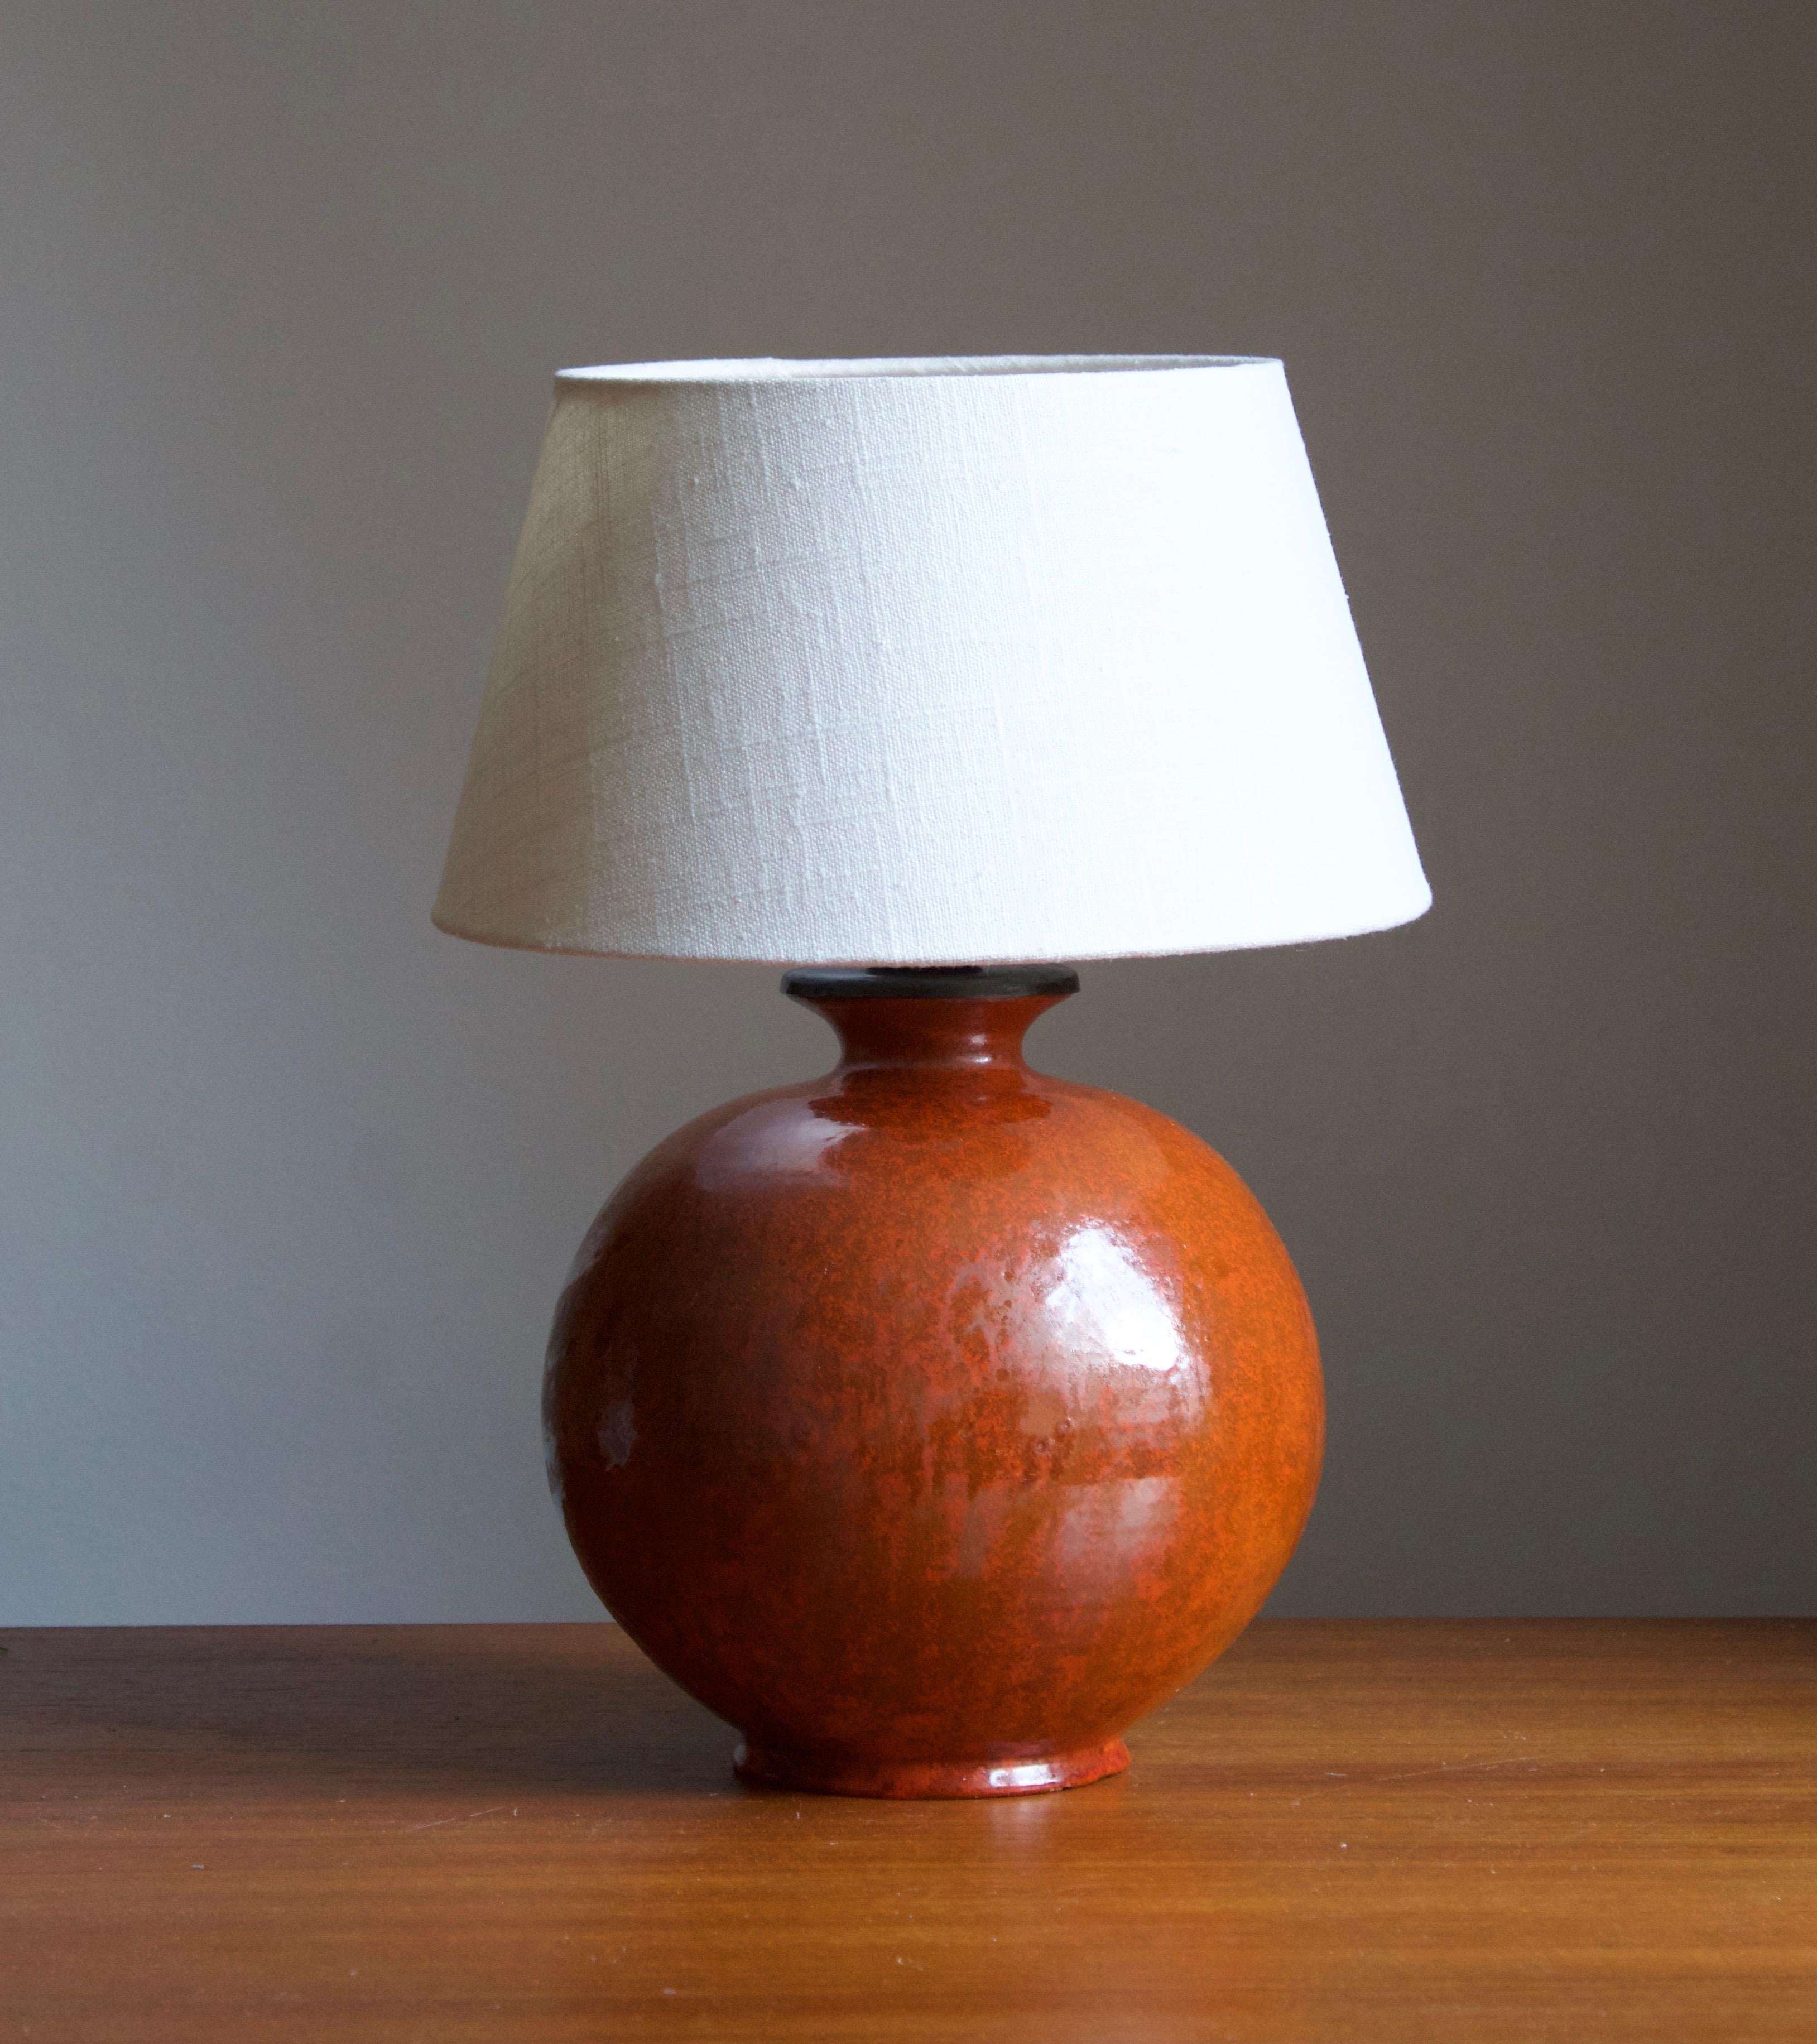 An early modernist table lamp. by Upsala-Ekeby, Sweden, 1930s. Stamped. 

Stated dimensions exclude lampshade. Height includes the socket. Sold without lampshade.

Glaze features an orange color.

Other designers of the period include Ettore